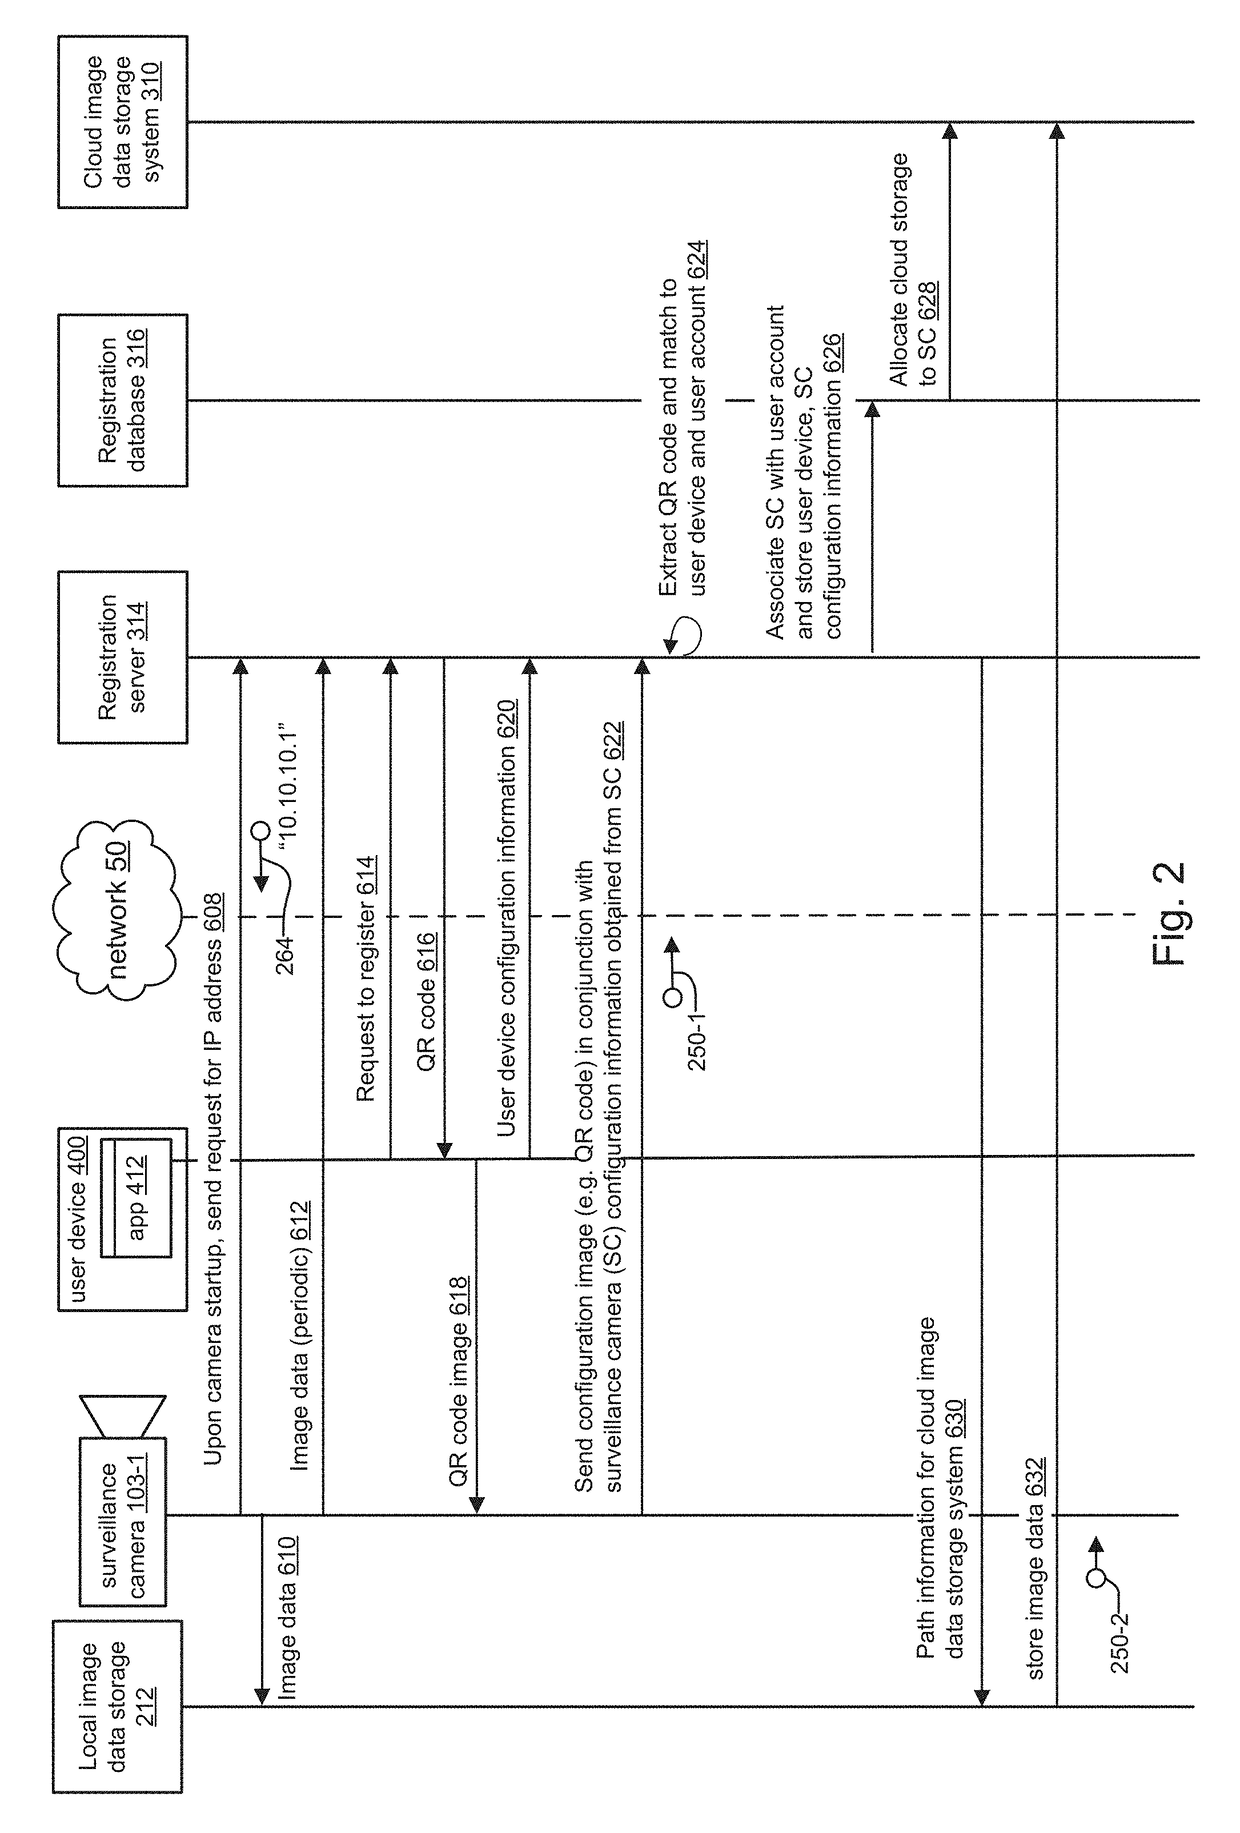 System and method for configuring surveillance cameras using mobile computing devices